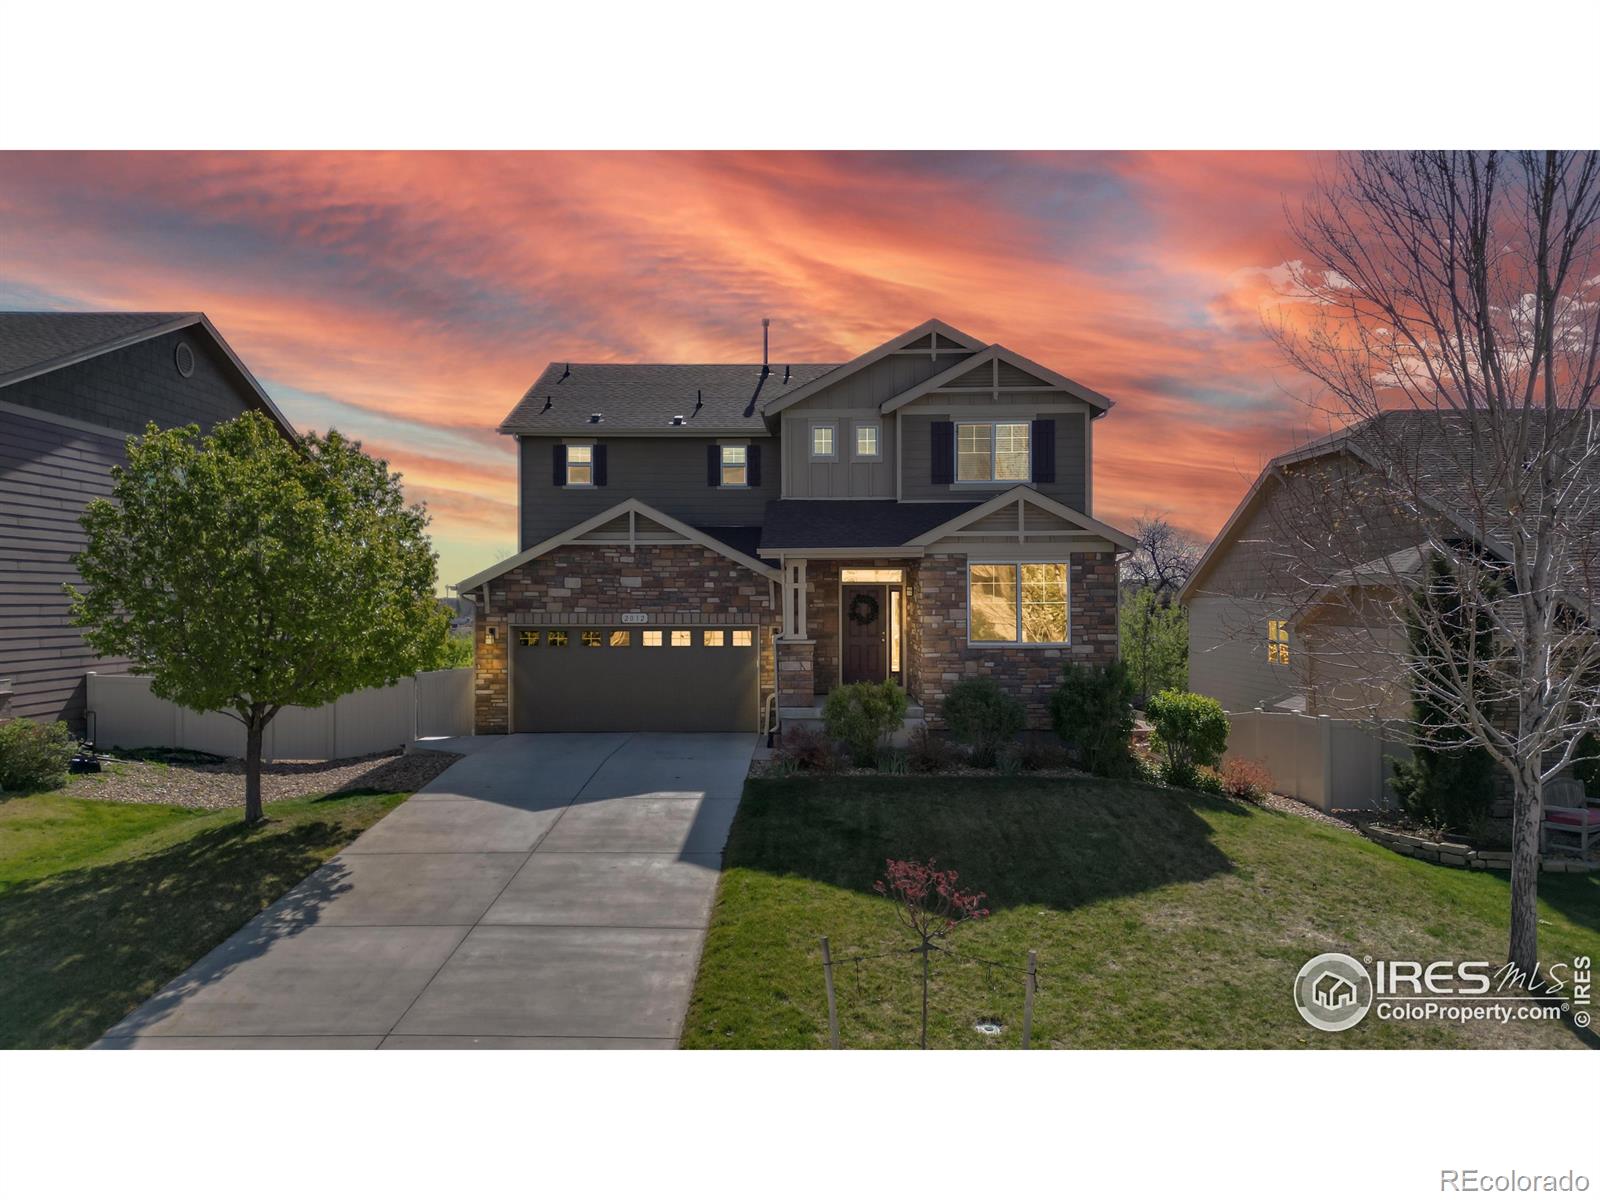 2012  80th Ave Ct, greeley MLS: 4567891008059 Beds: 4 Baths: 4 Price: $550,000